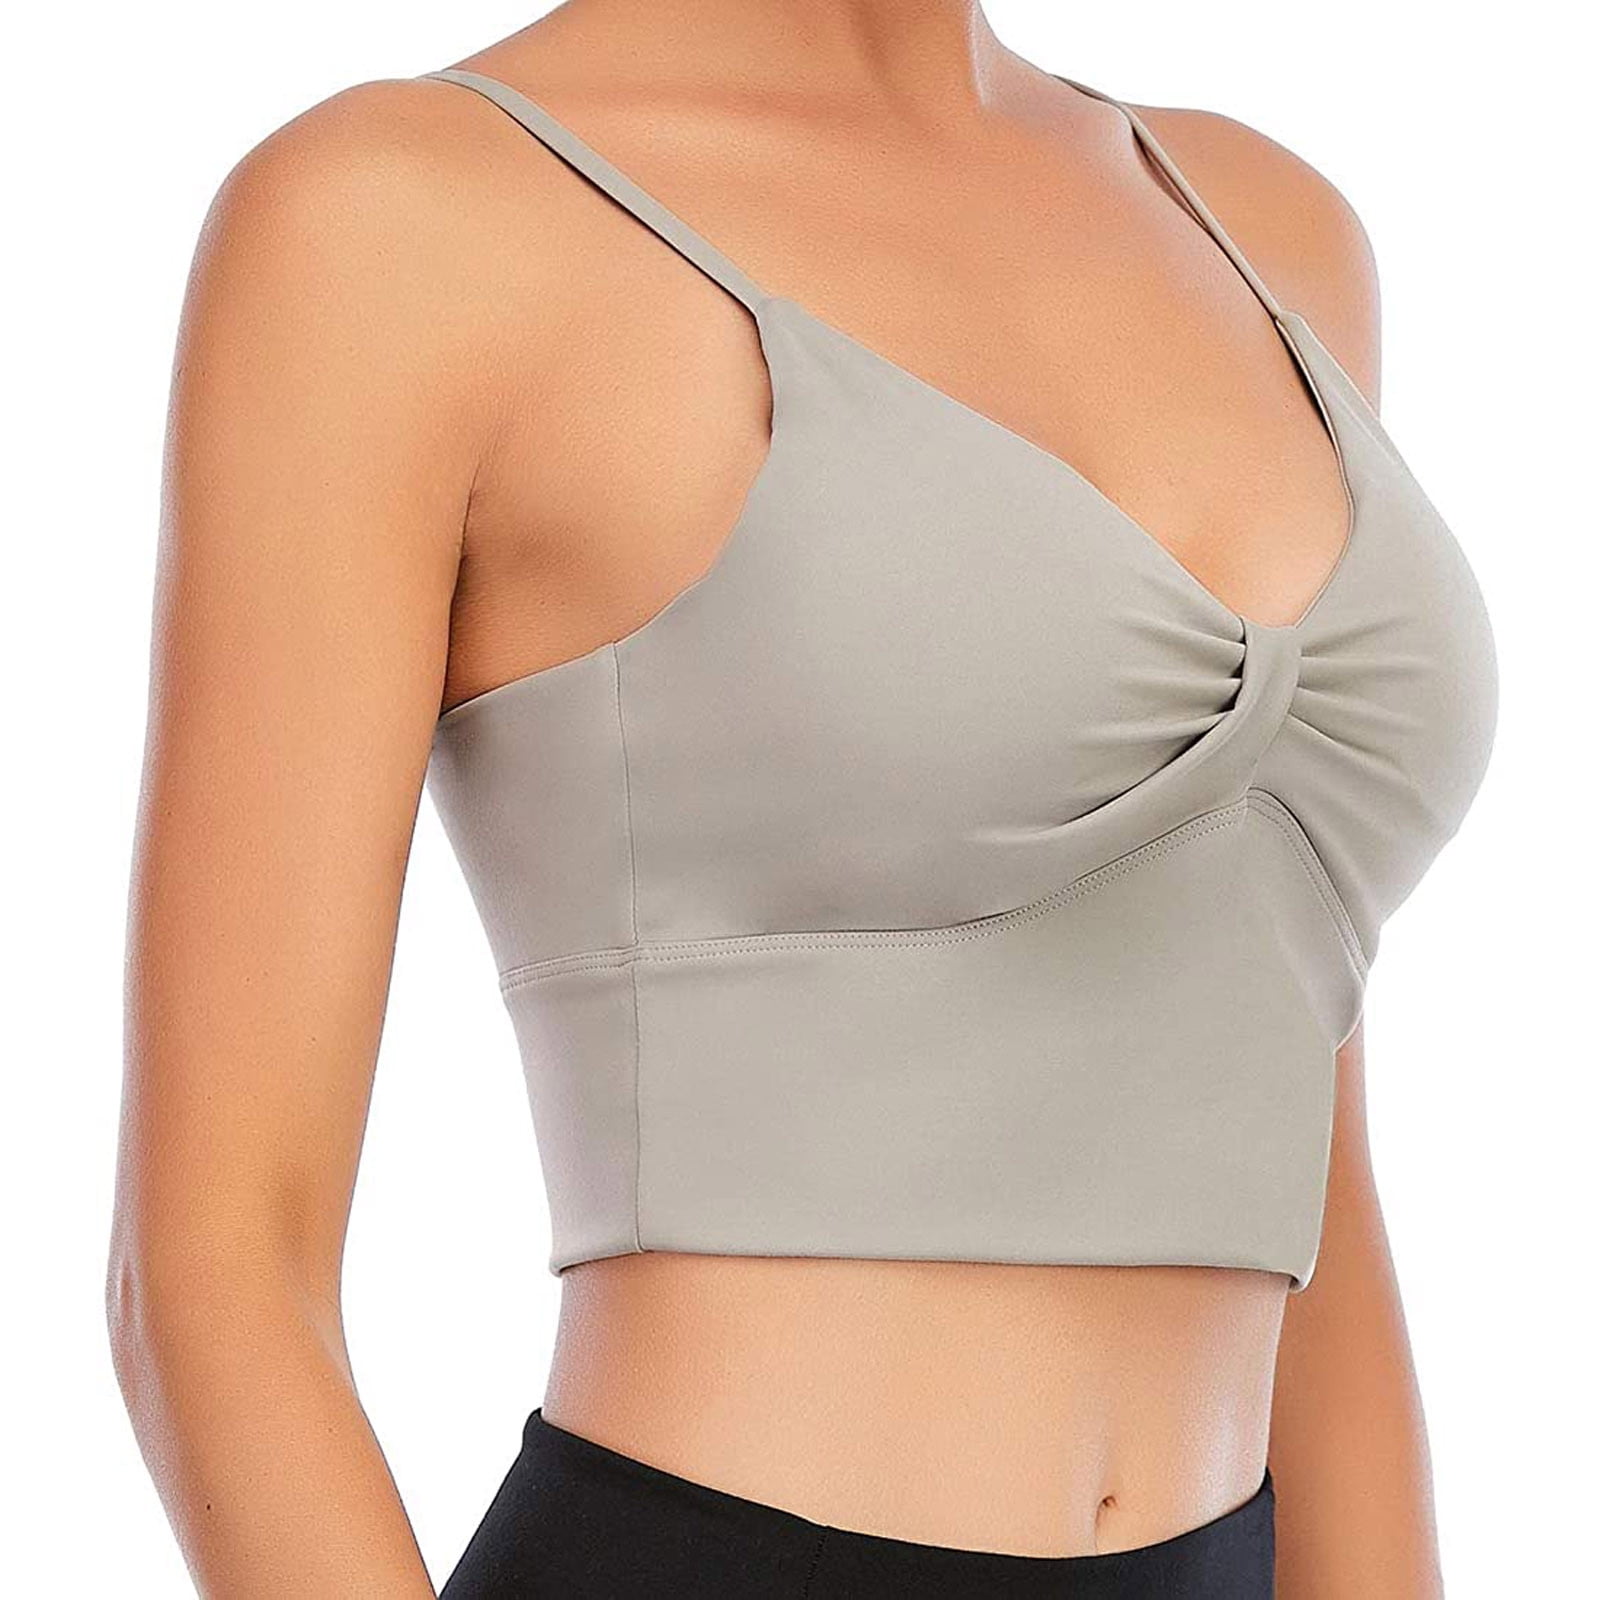 Shop LC Set of 3 SANKOM Black, Gray and Beige Color Patent Support & Posture  Bra with, Bamboo and Cooling Fibers -M/L Birthday Gifts at  Women's  Clothing store